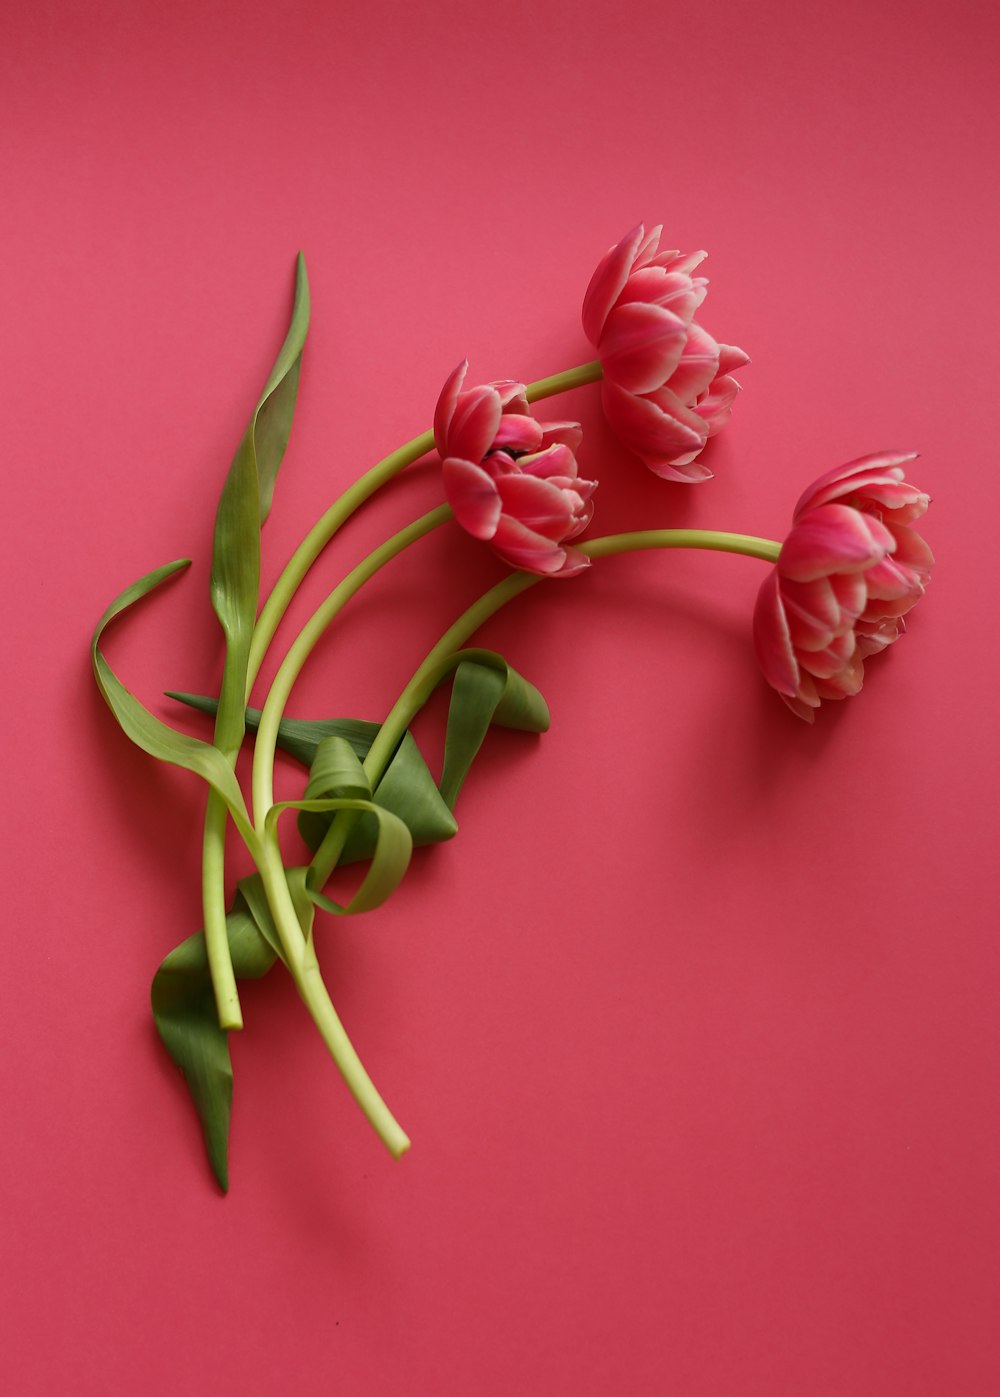 three pink tulips on a pink background